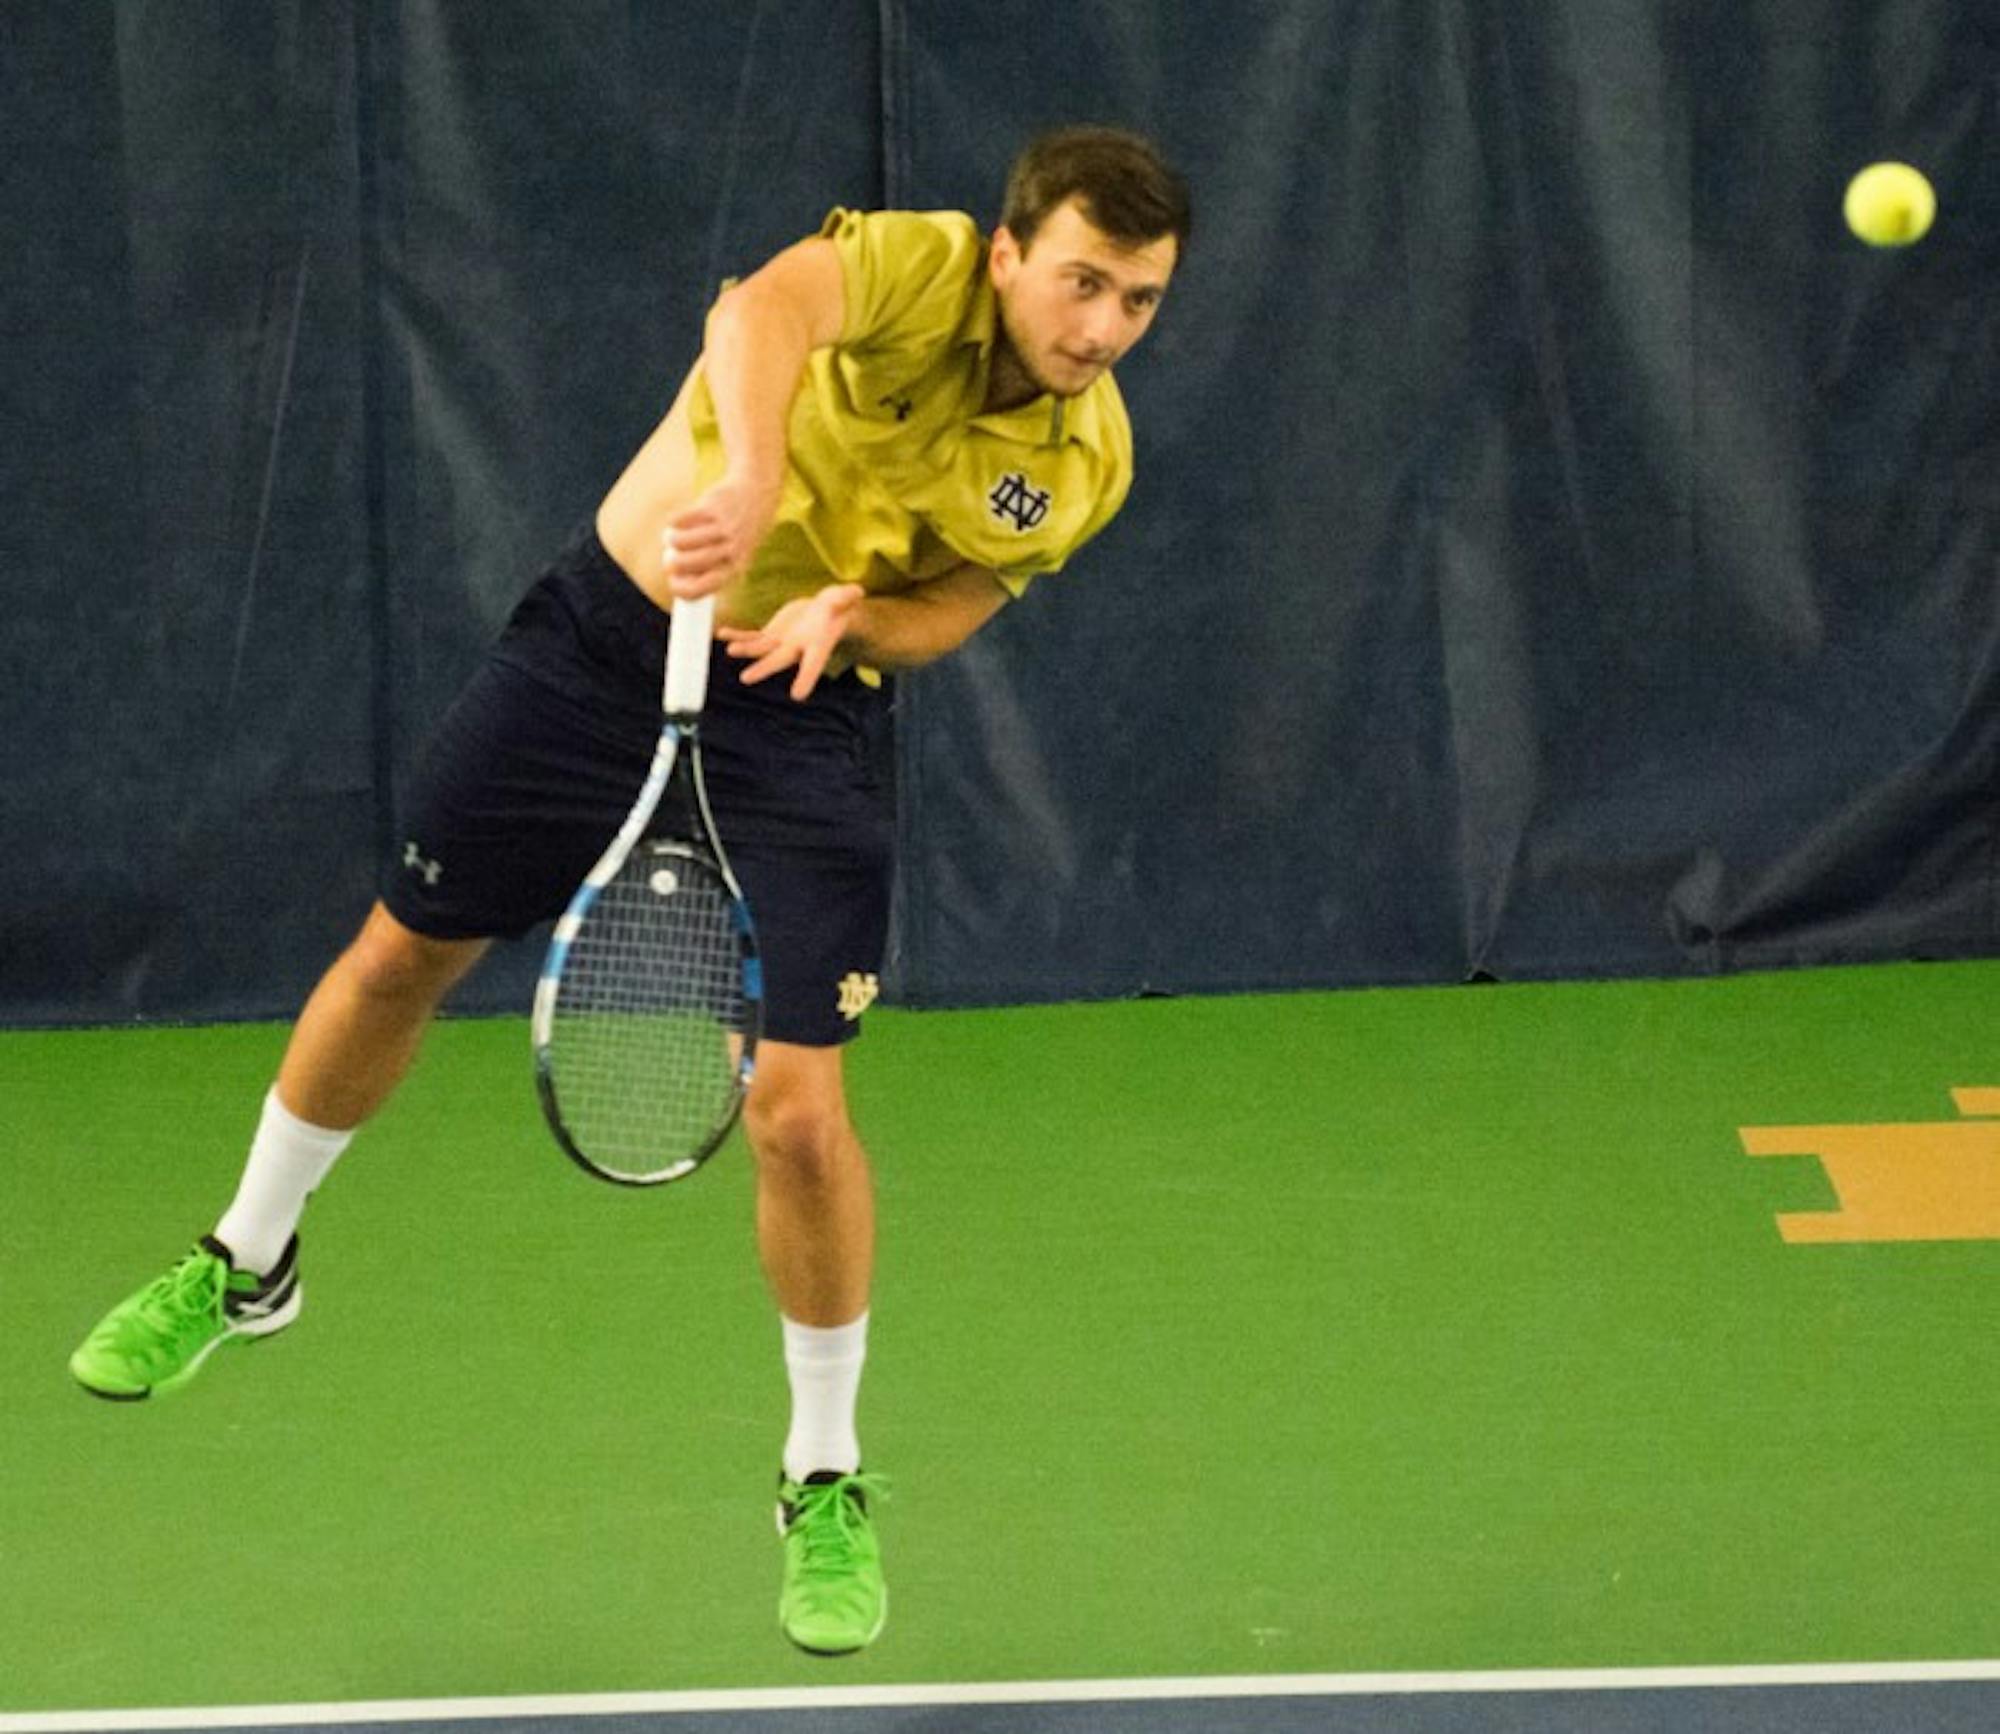 Irish senior Eddy Covalschi returns the ball during Notre Dame’s 5-2 win over Duke on March 18 at Eck Tennis Pavilion.